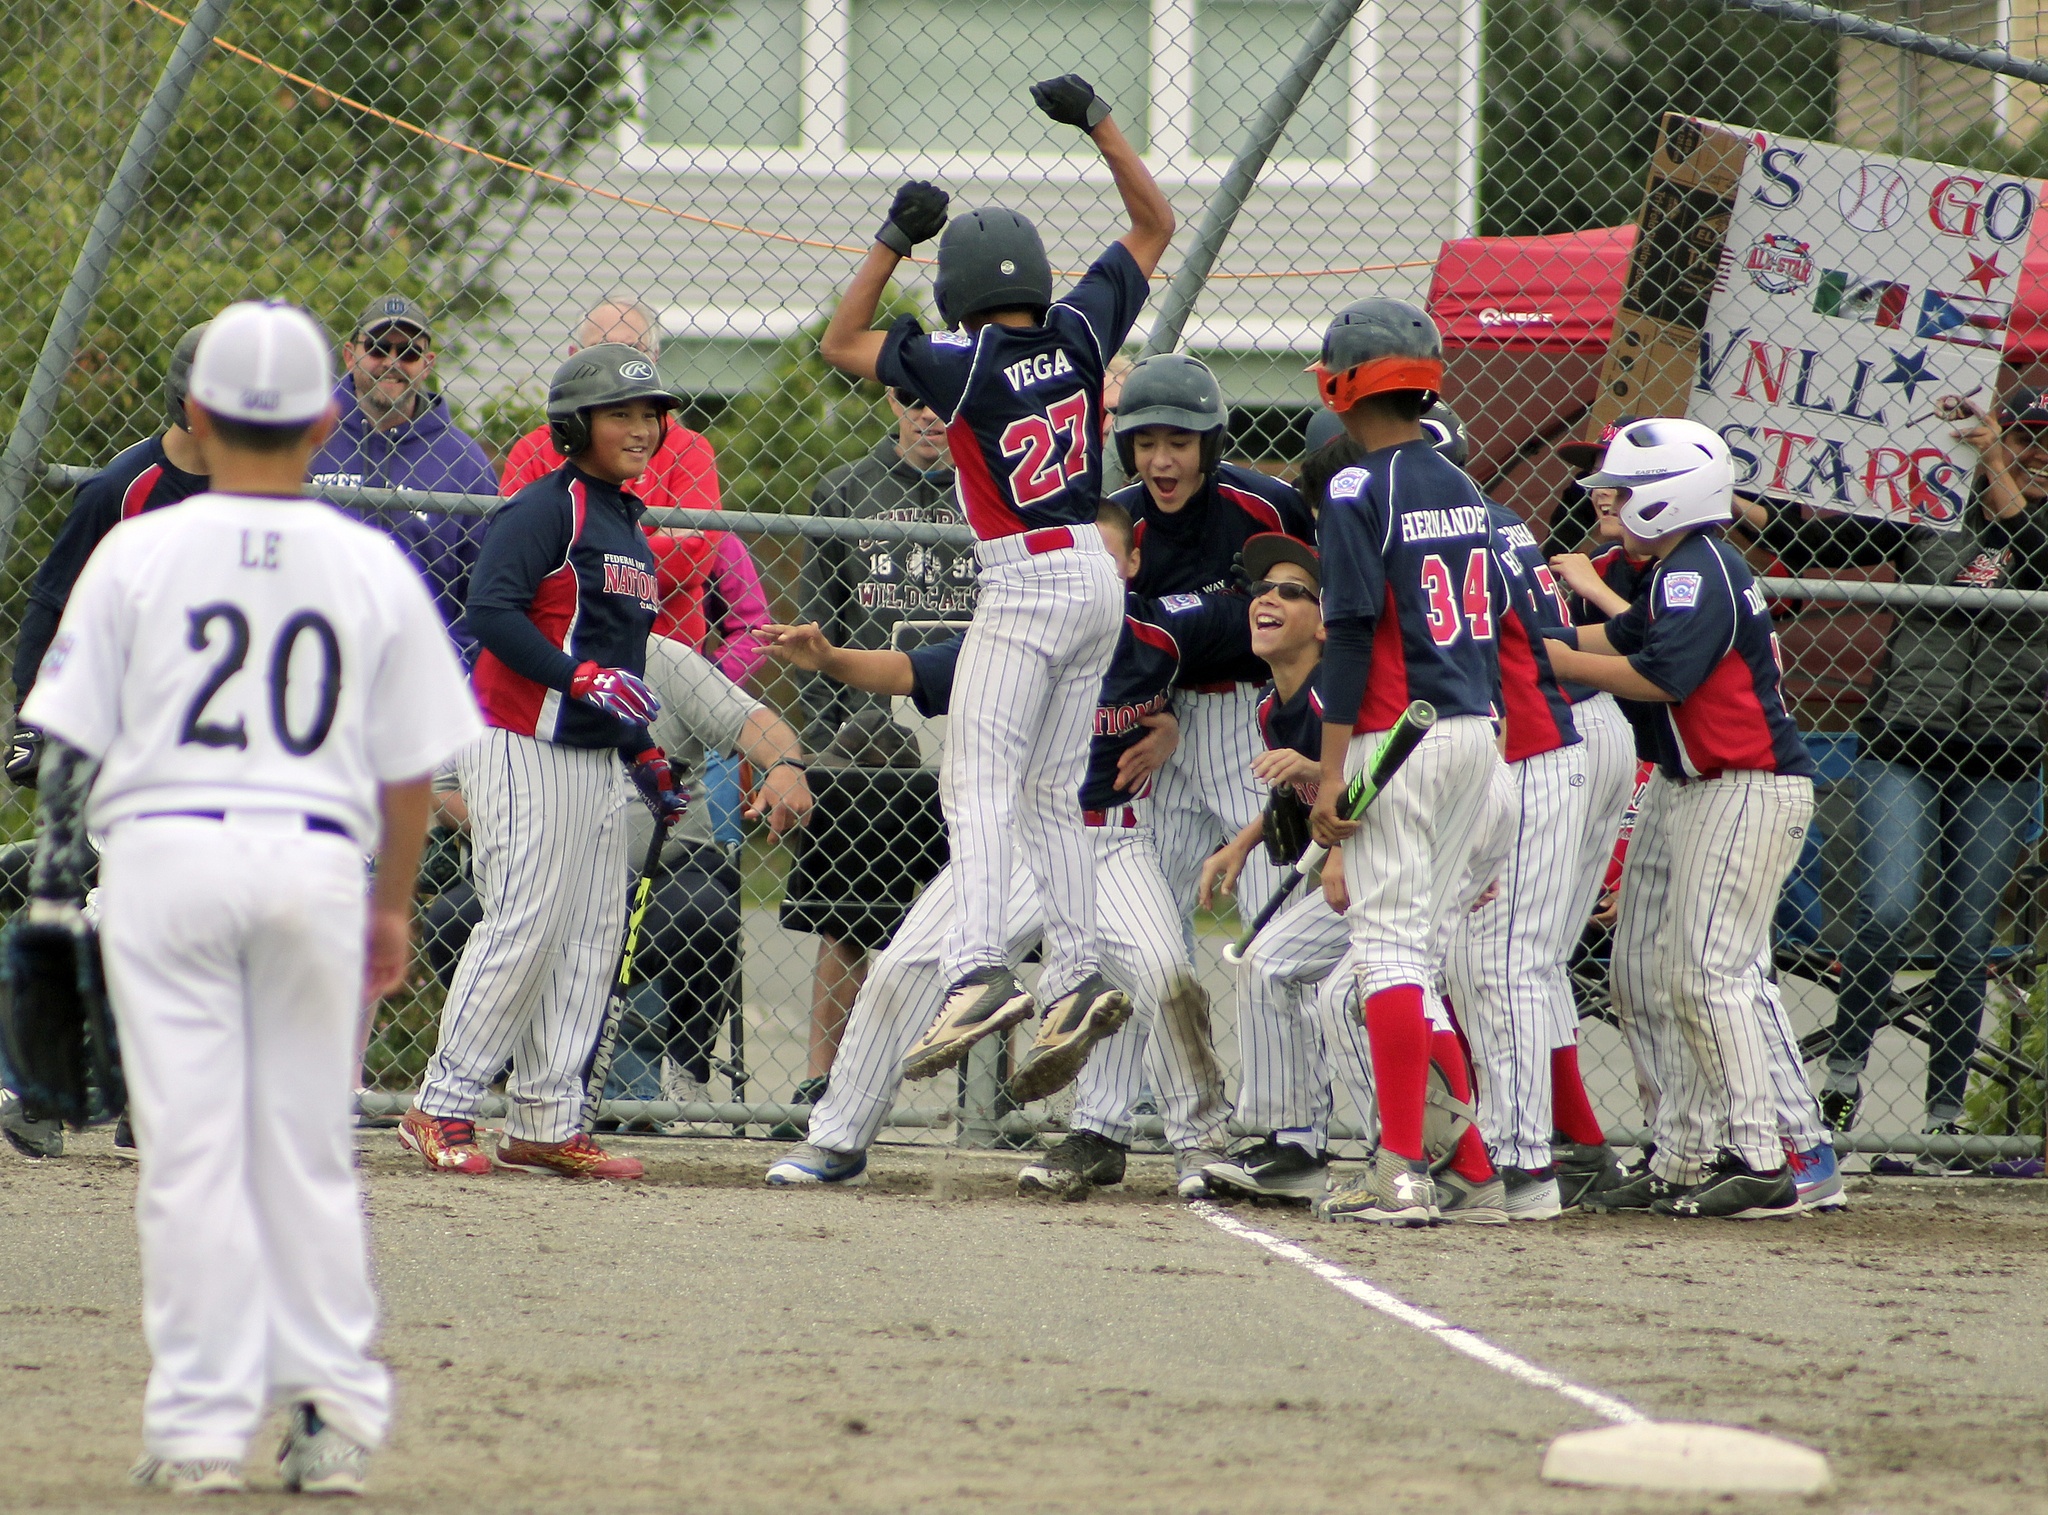 Aydan Vega leaps onto home plate after his two-run dinger. Photo by Evan Elliott.